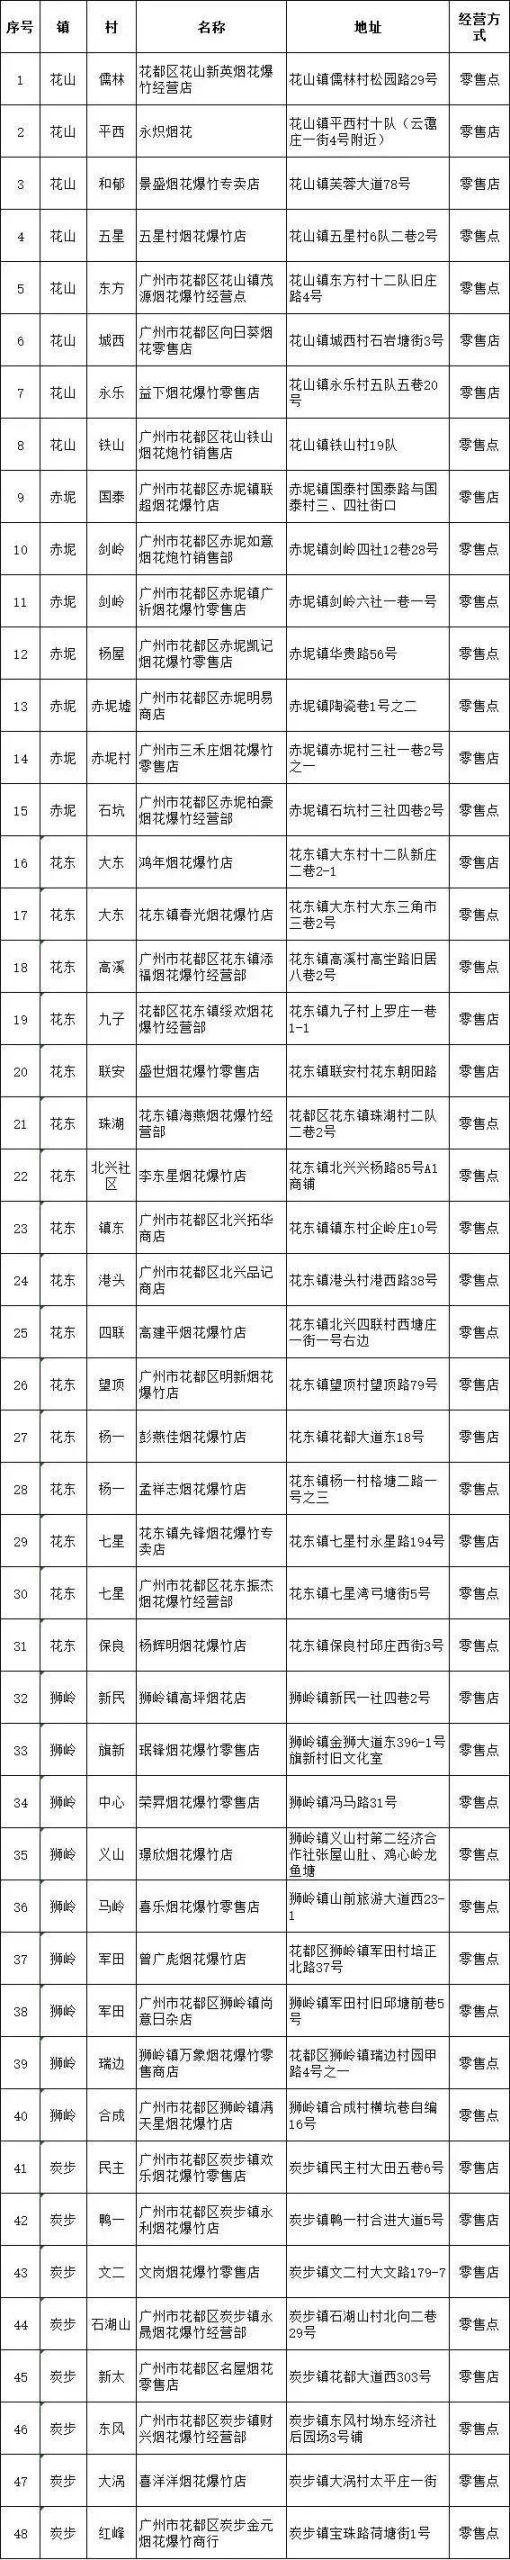 How to buy fireworks? Where can I set off fireworks? The latest release of Guangzhou four districts!